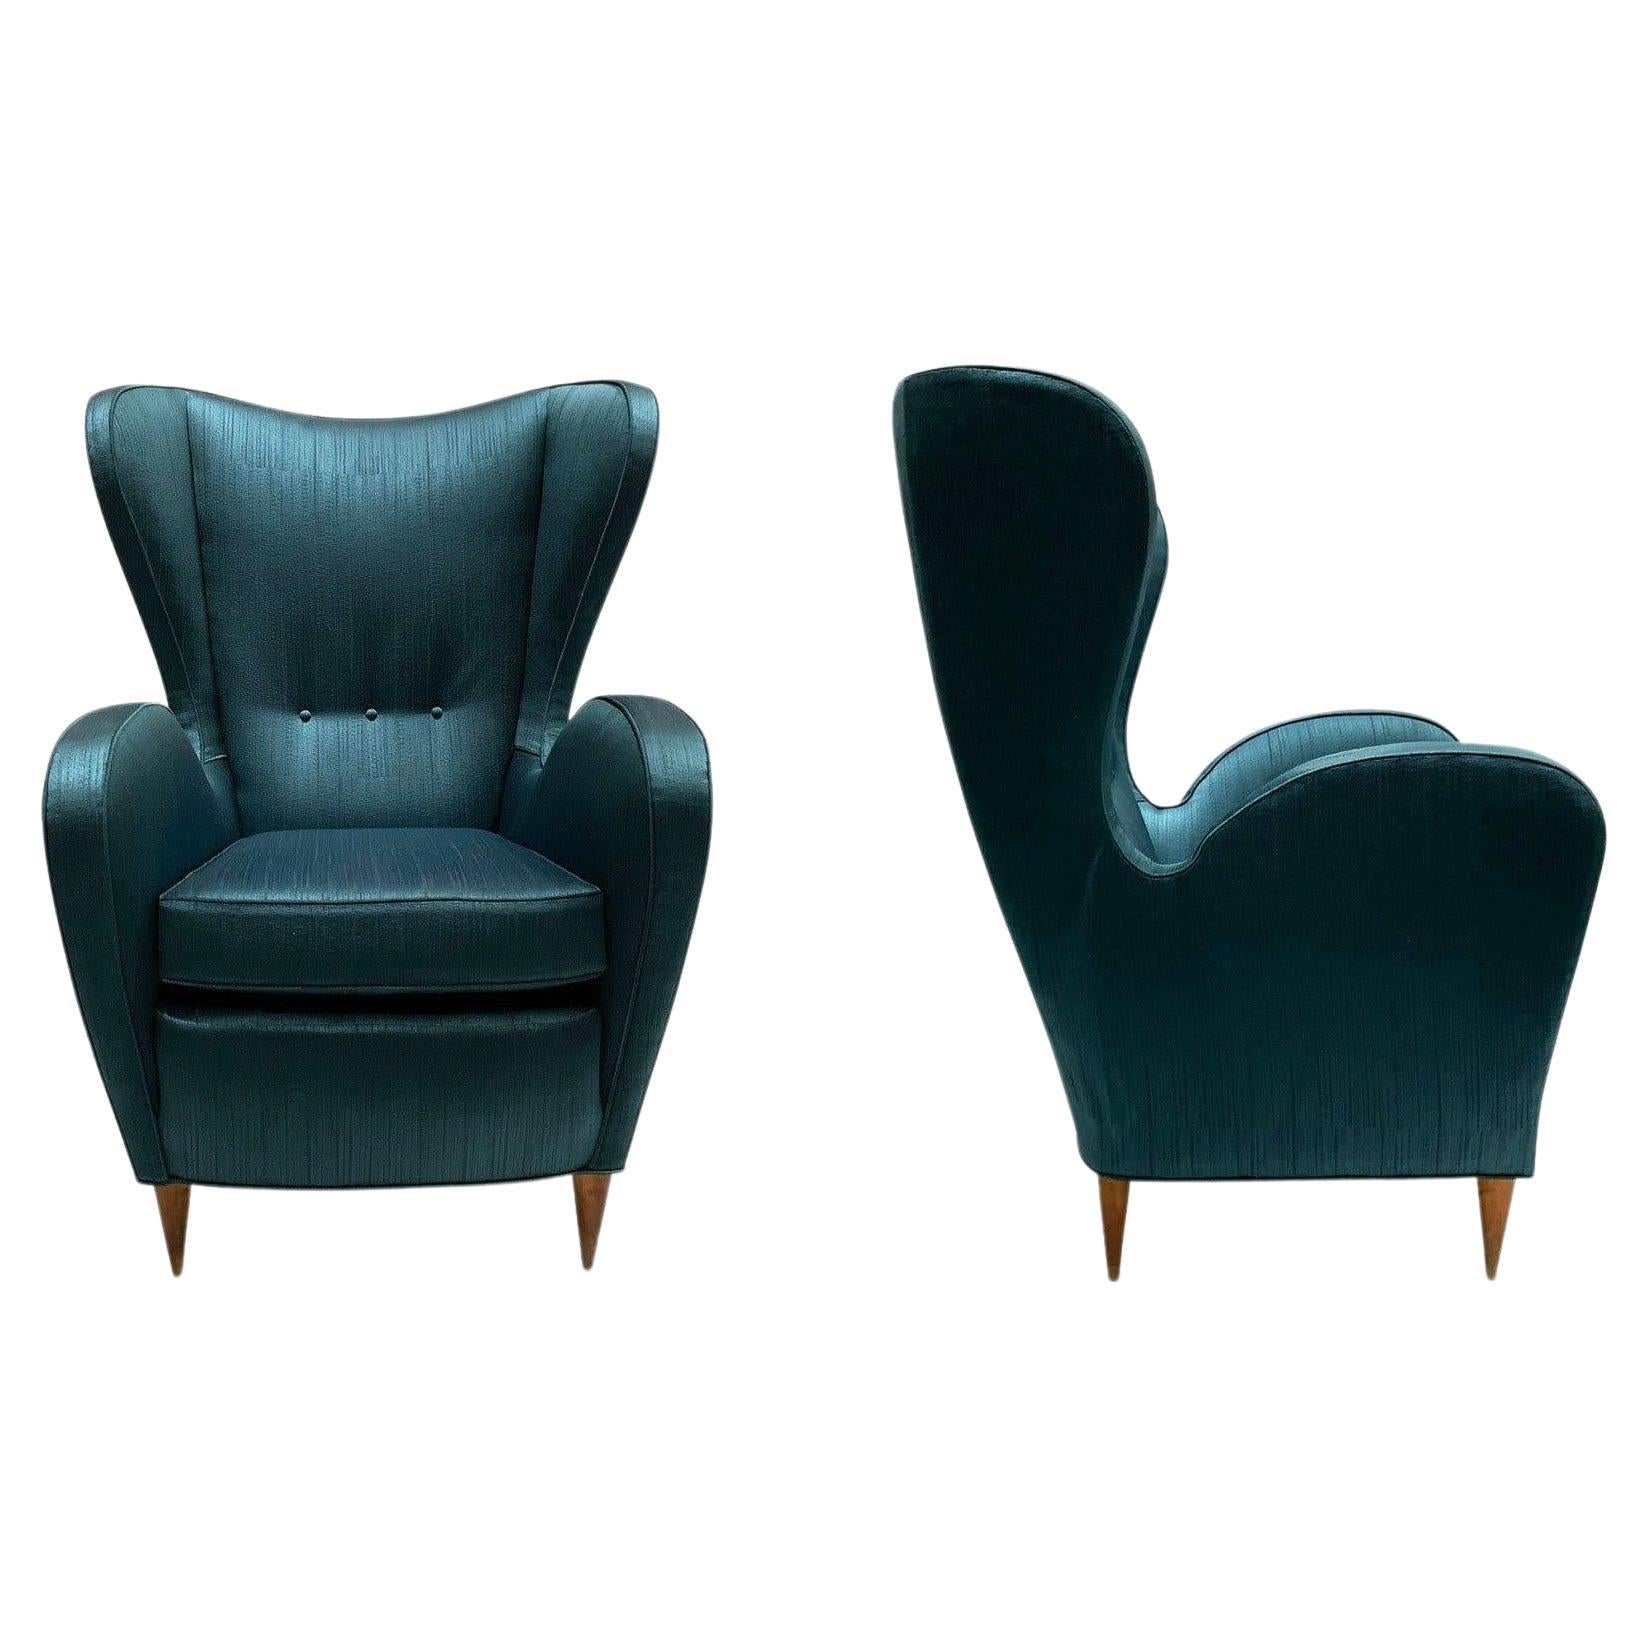 1950s Italian Wingback Chairs For Sale